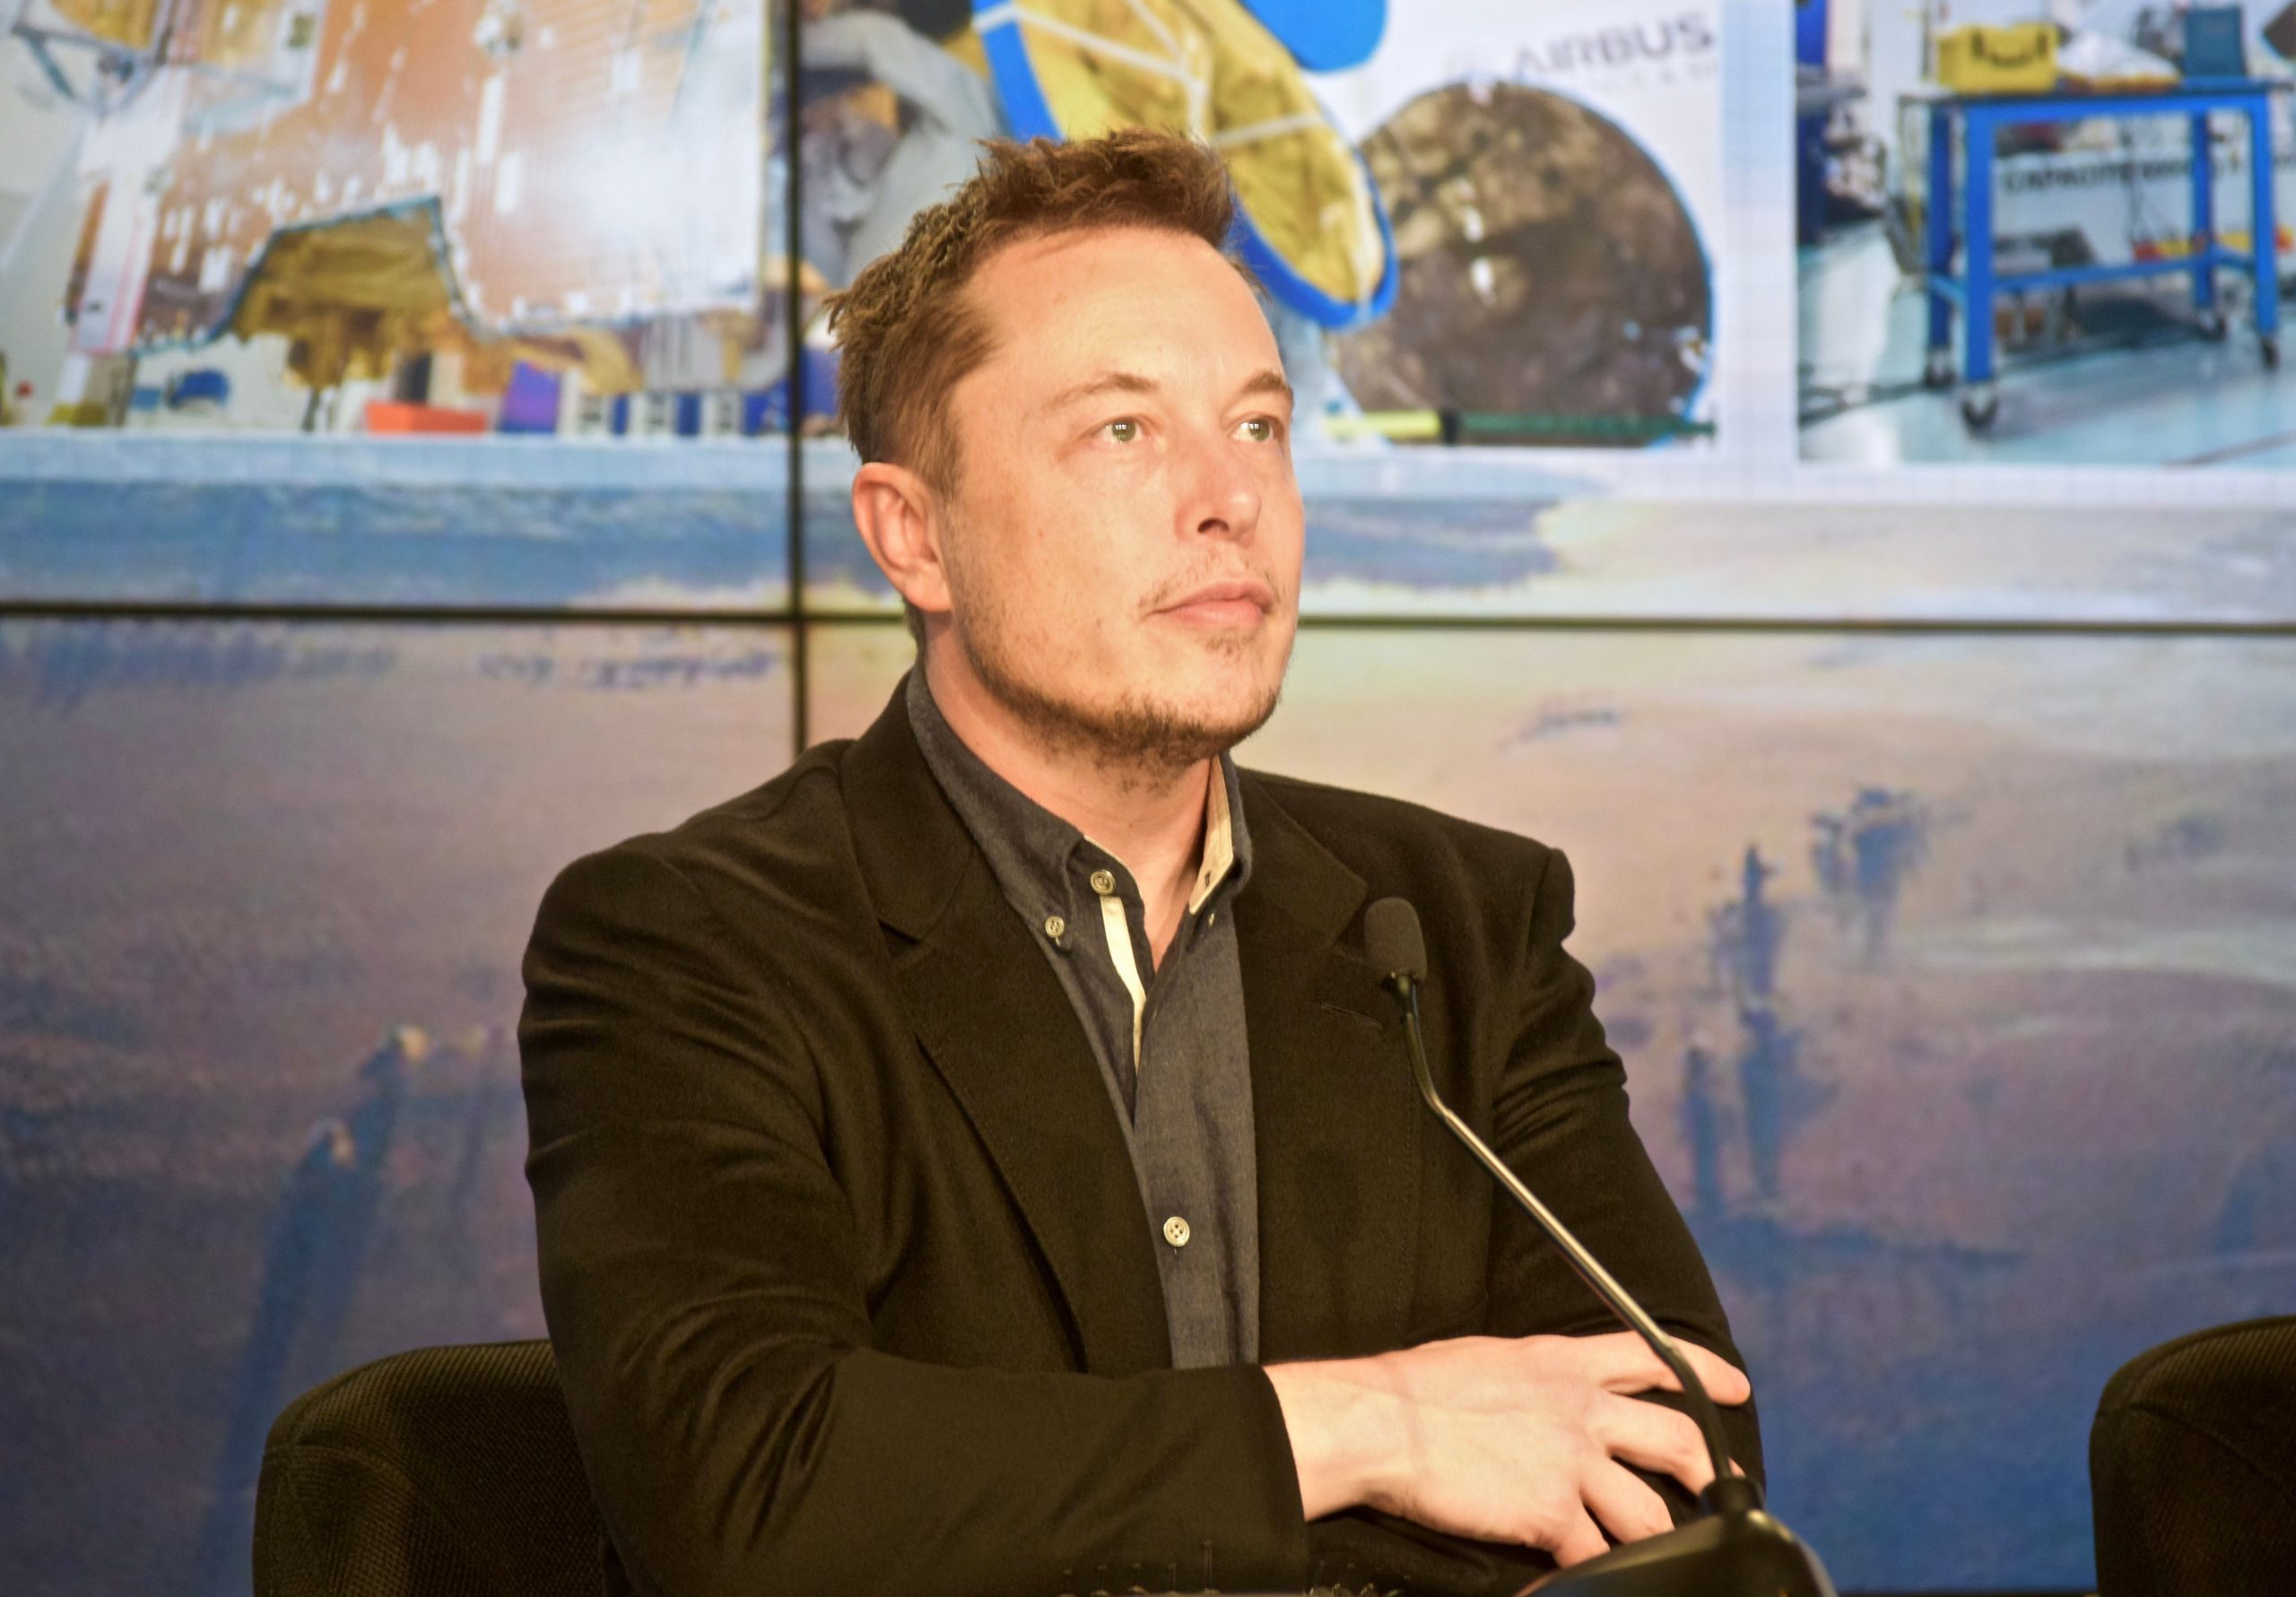 Let it fly: Elon Musk says US should avoid regulating cryptocurrency market